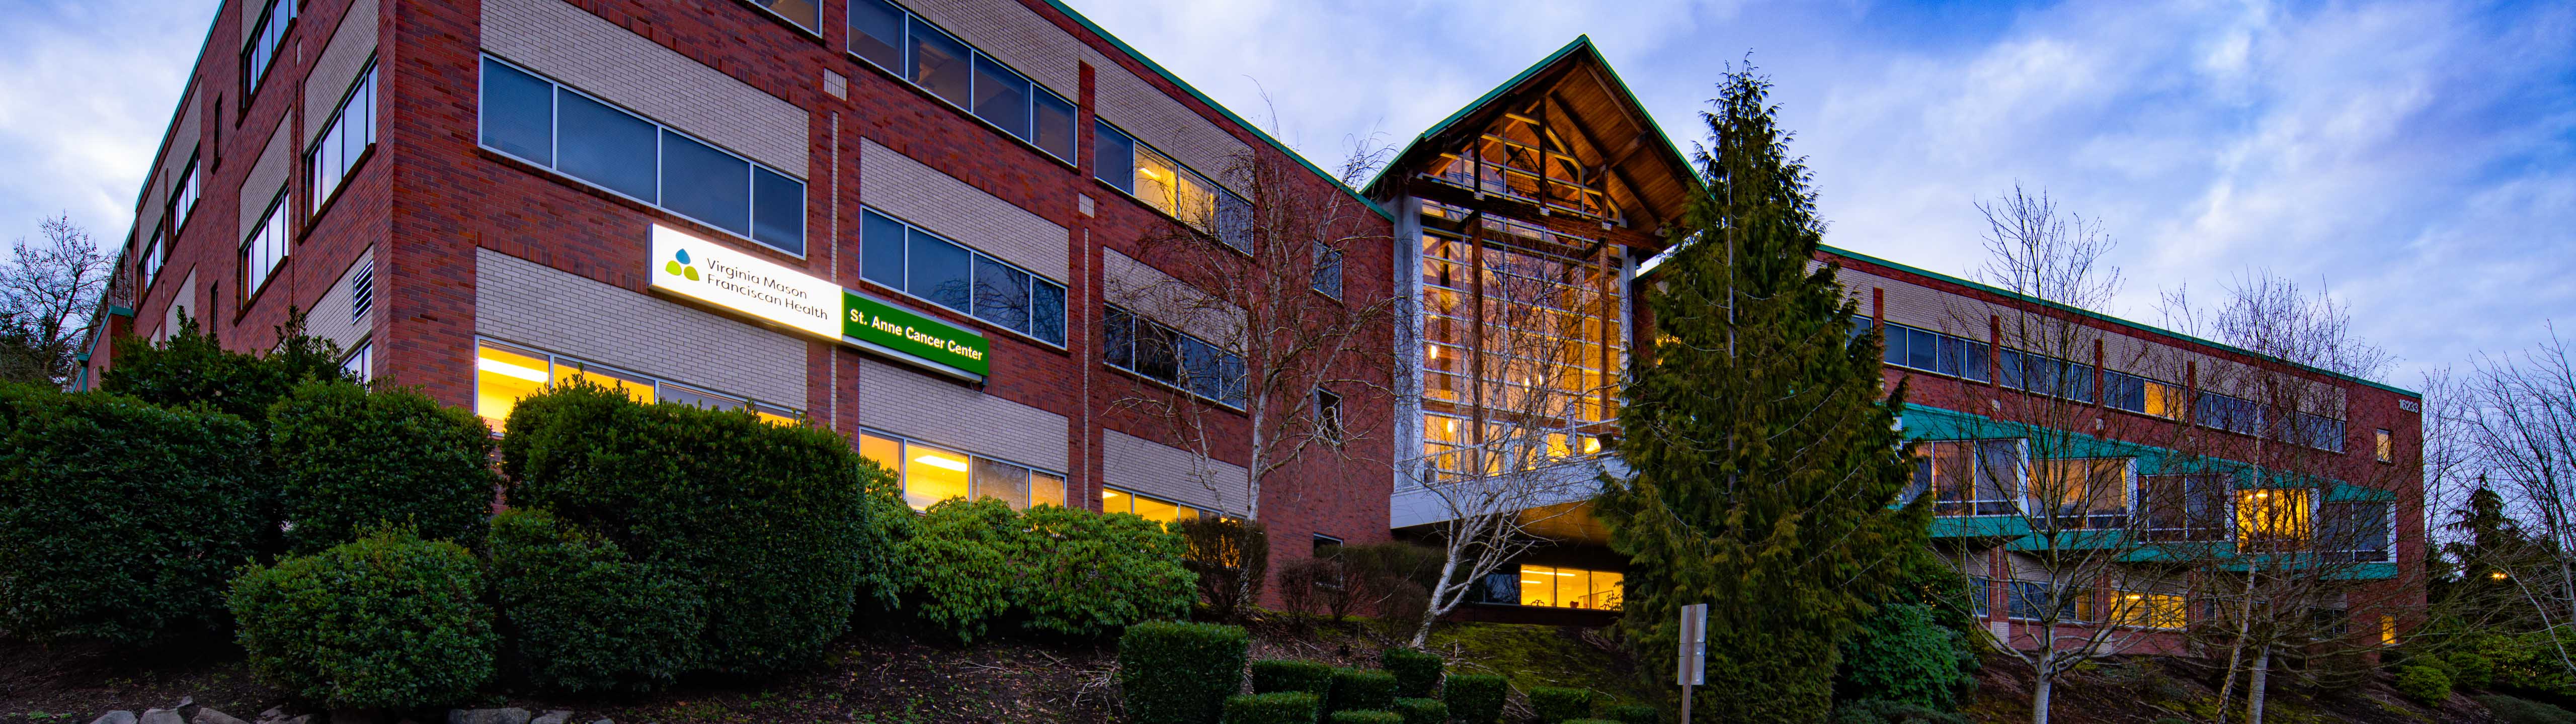 St. Anne Infusion Clinic - Burien image